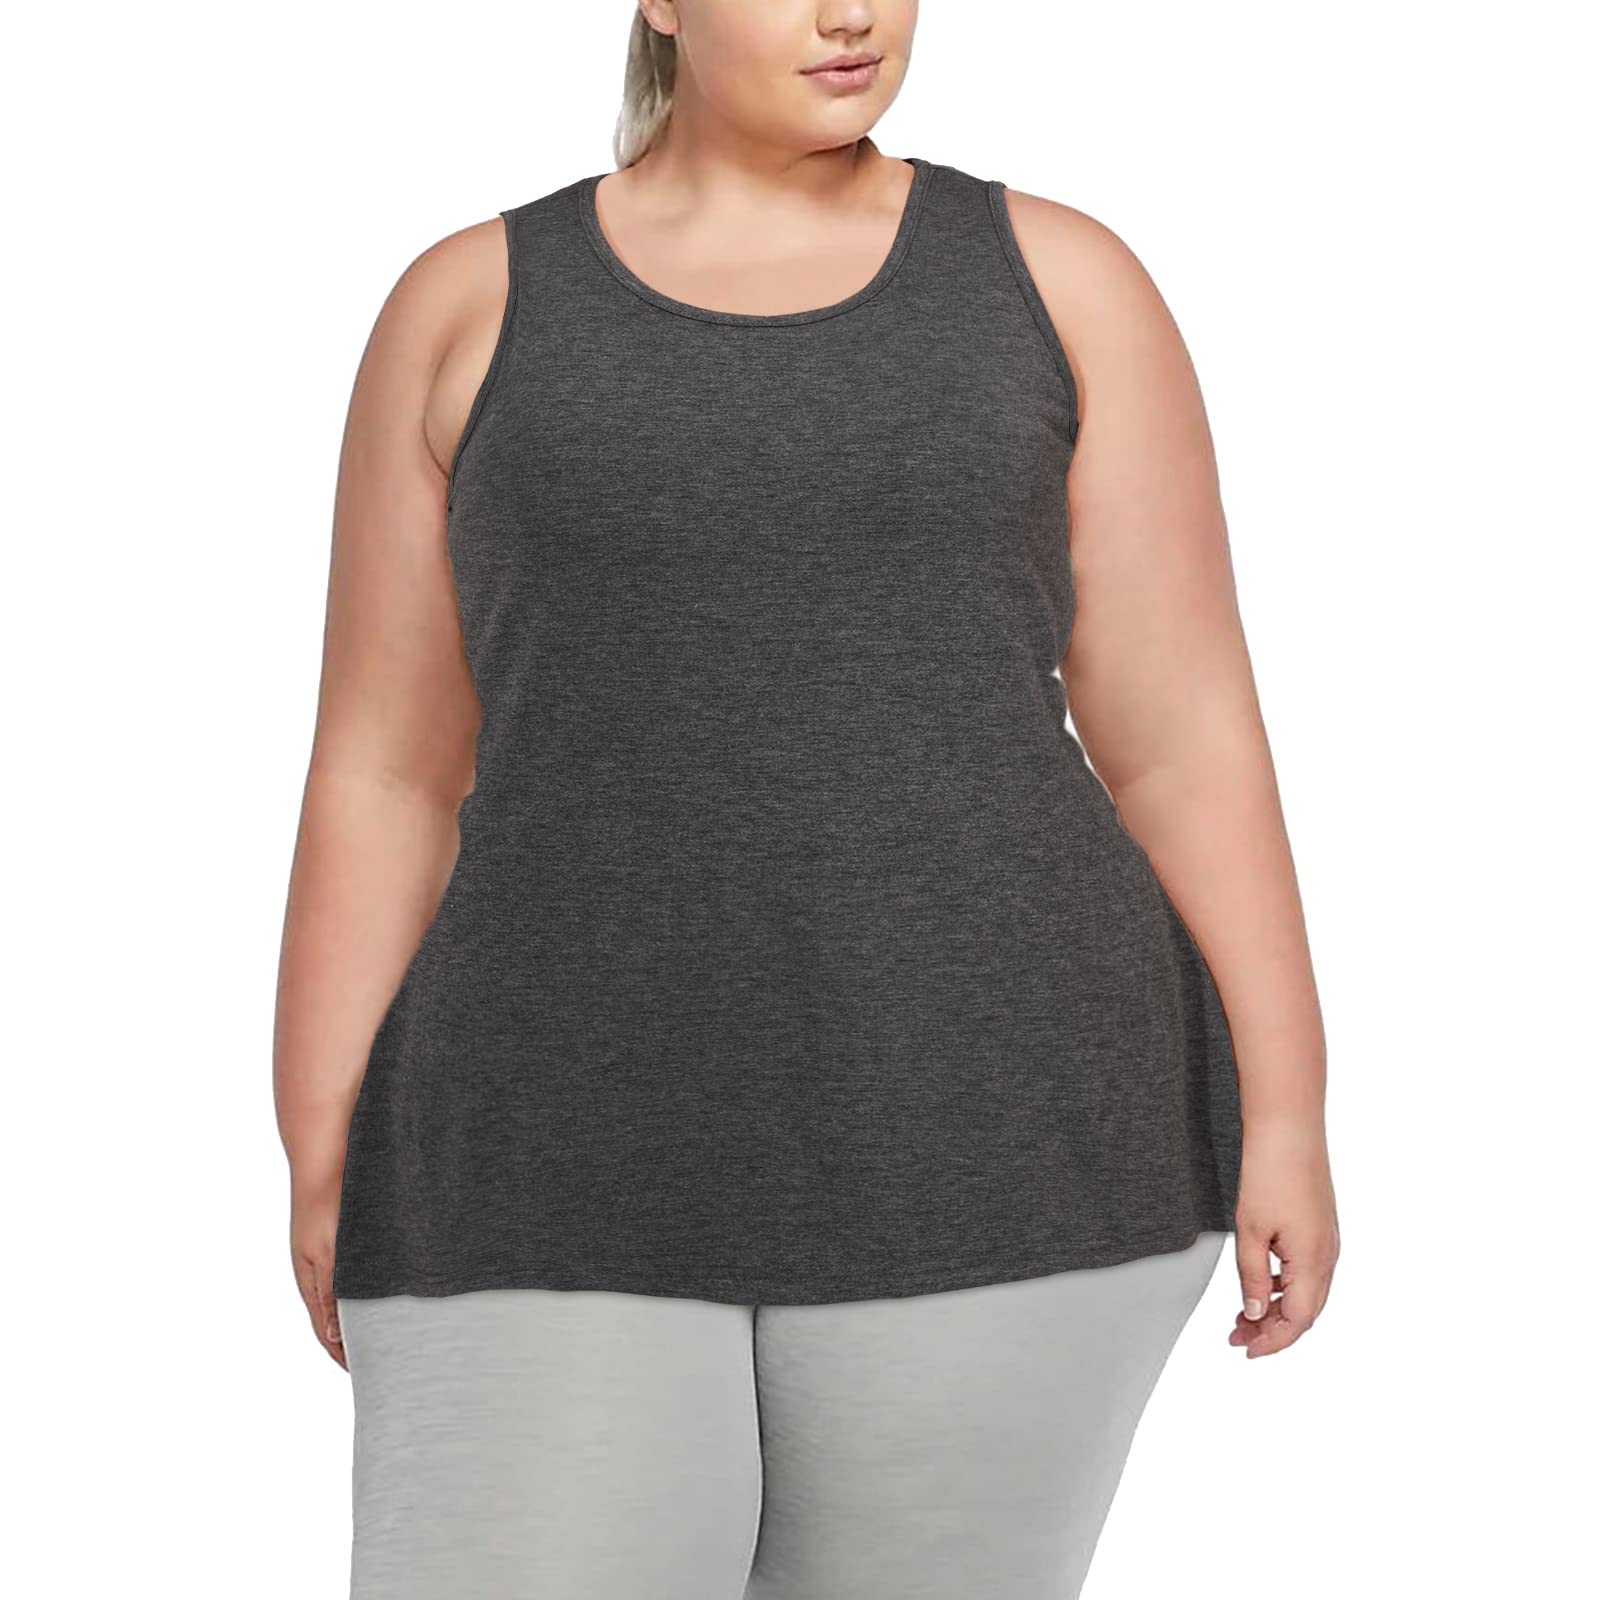 Plus Size Tank Tops for Women Summer Sleeveless T-Shirts Loose-Grey - Moon Wood